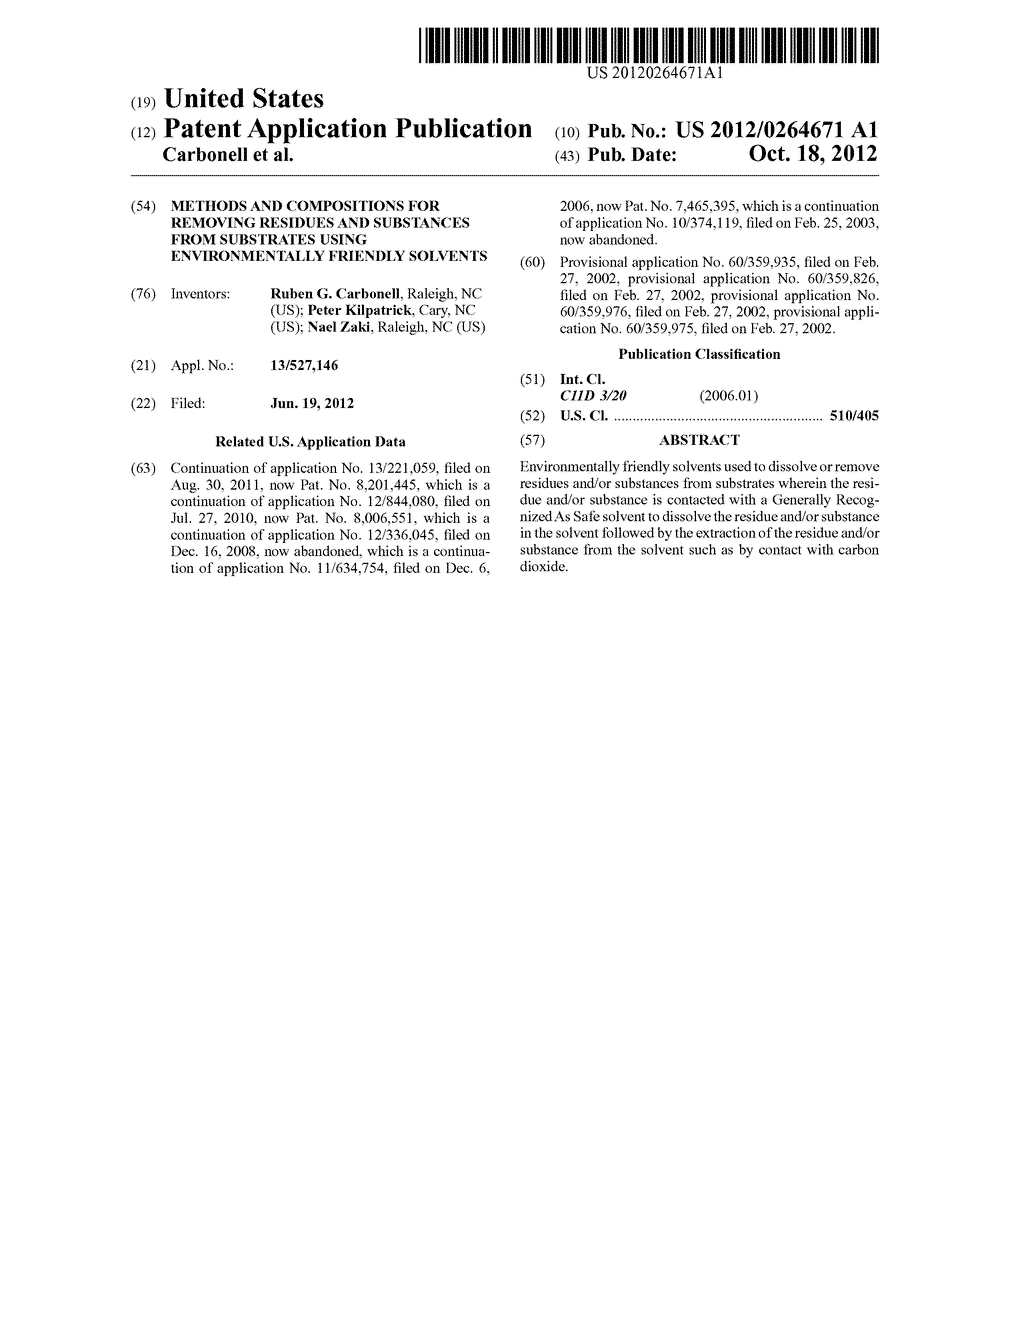 METHODS AND COMPOSITIONS FOR REMOVING RESIDUES AND SUBSTANCES FROM     SUBSTRATES USING ENVIRONMENTALLY FRIENDLY SOLVENTS - diagram, schematic, and image 01